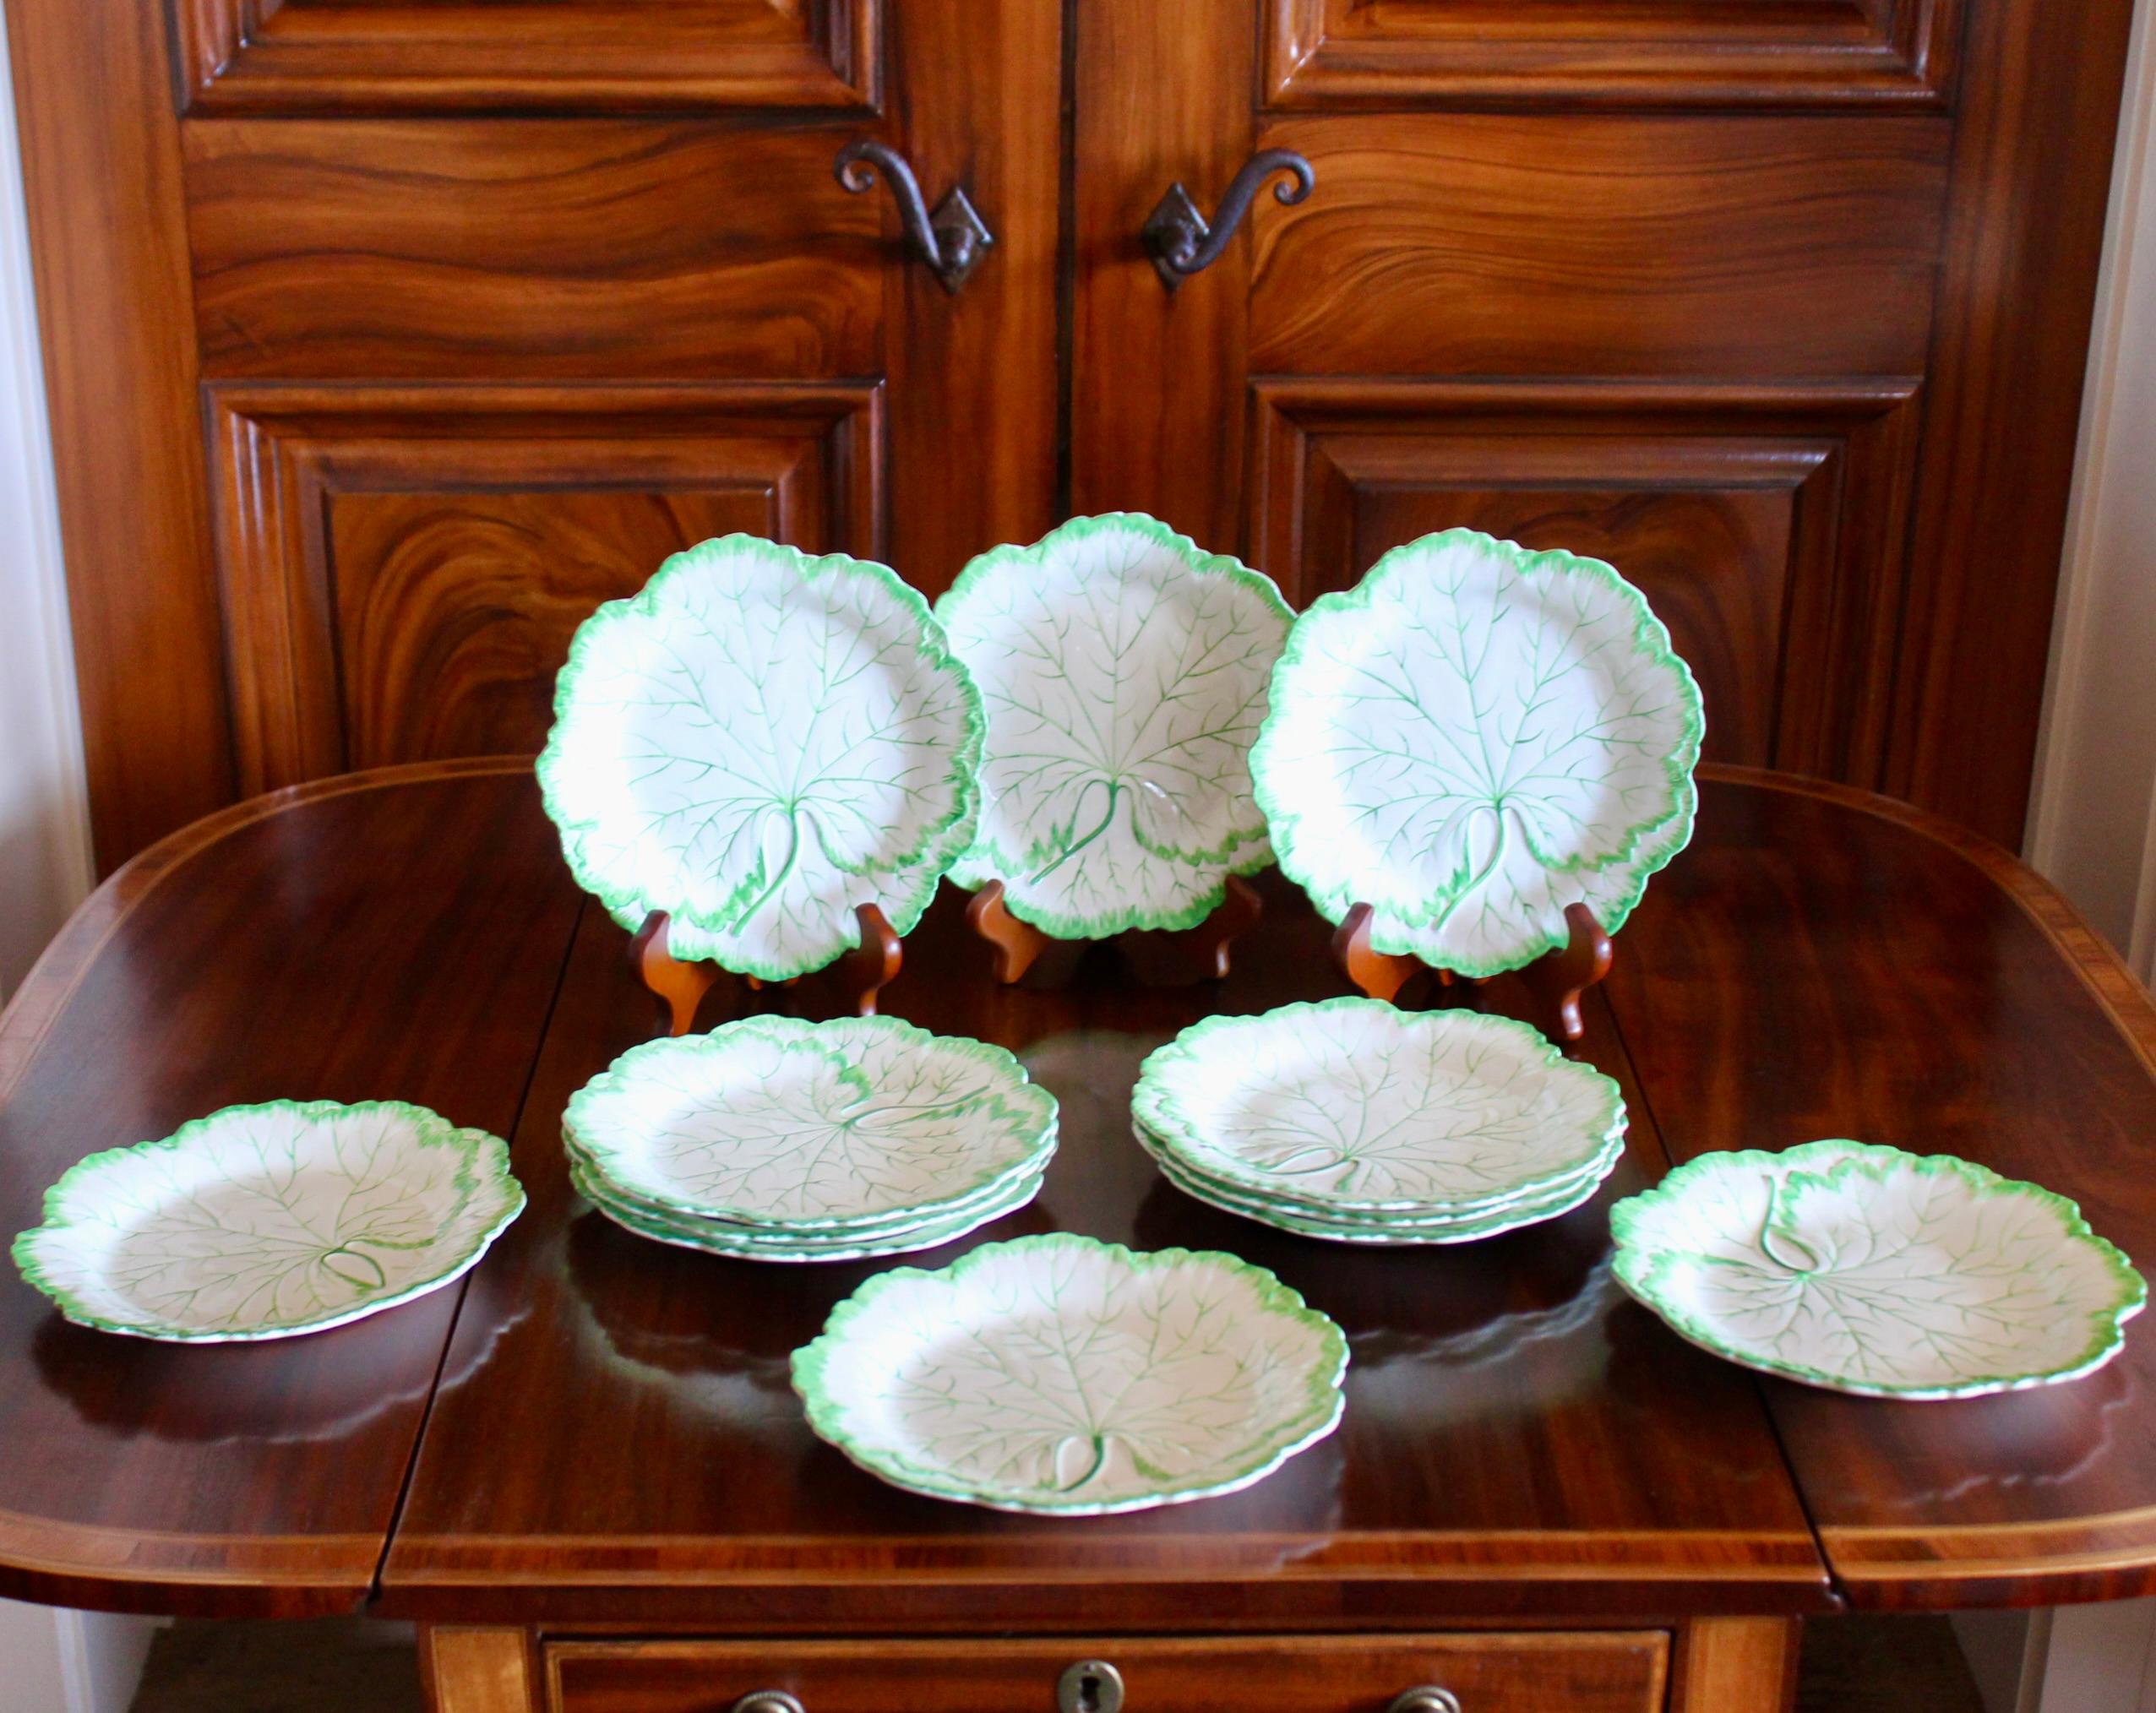 A very rare and sought after coloration of a full and ruffled geranium leaf pattern moulded in low relief, with edges and veins picked out in a fresh green glaze. Second half of the 19th century, exceptionally good antique condition, with artisanal